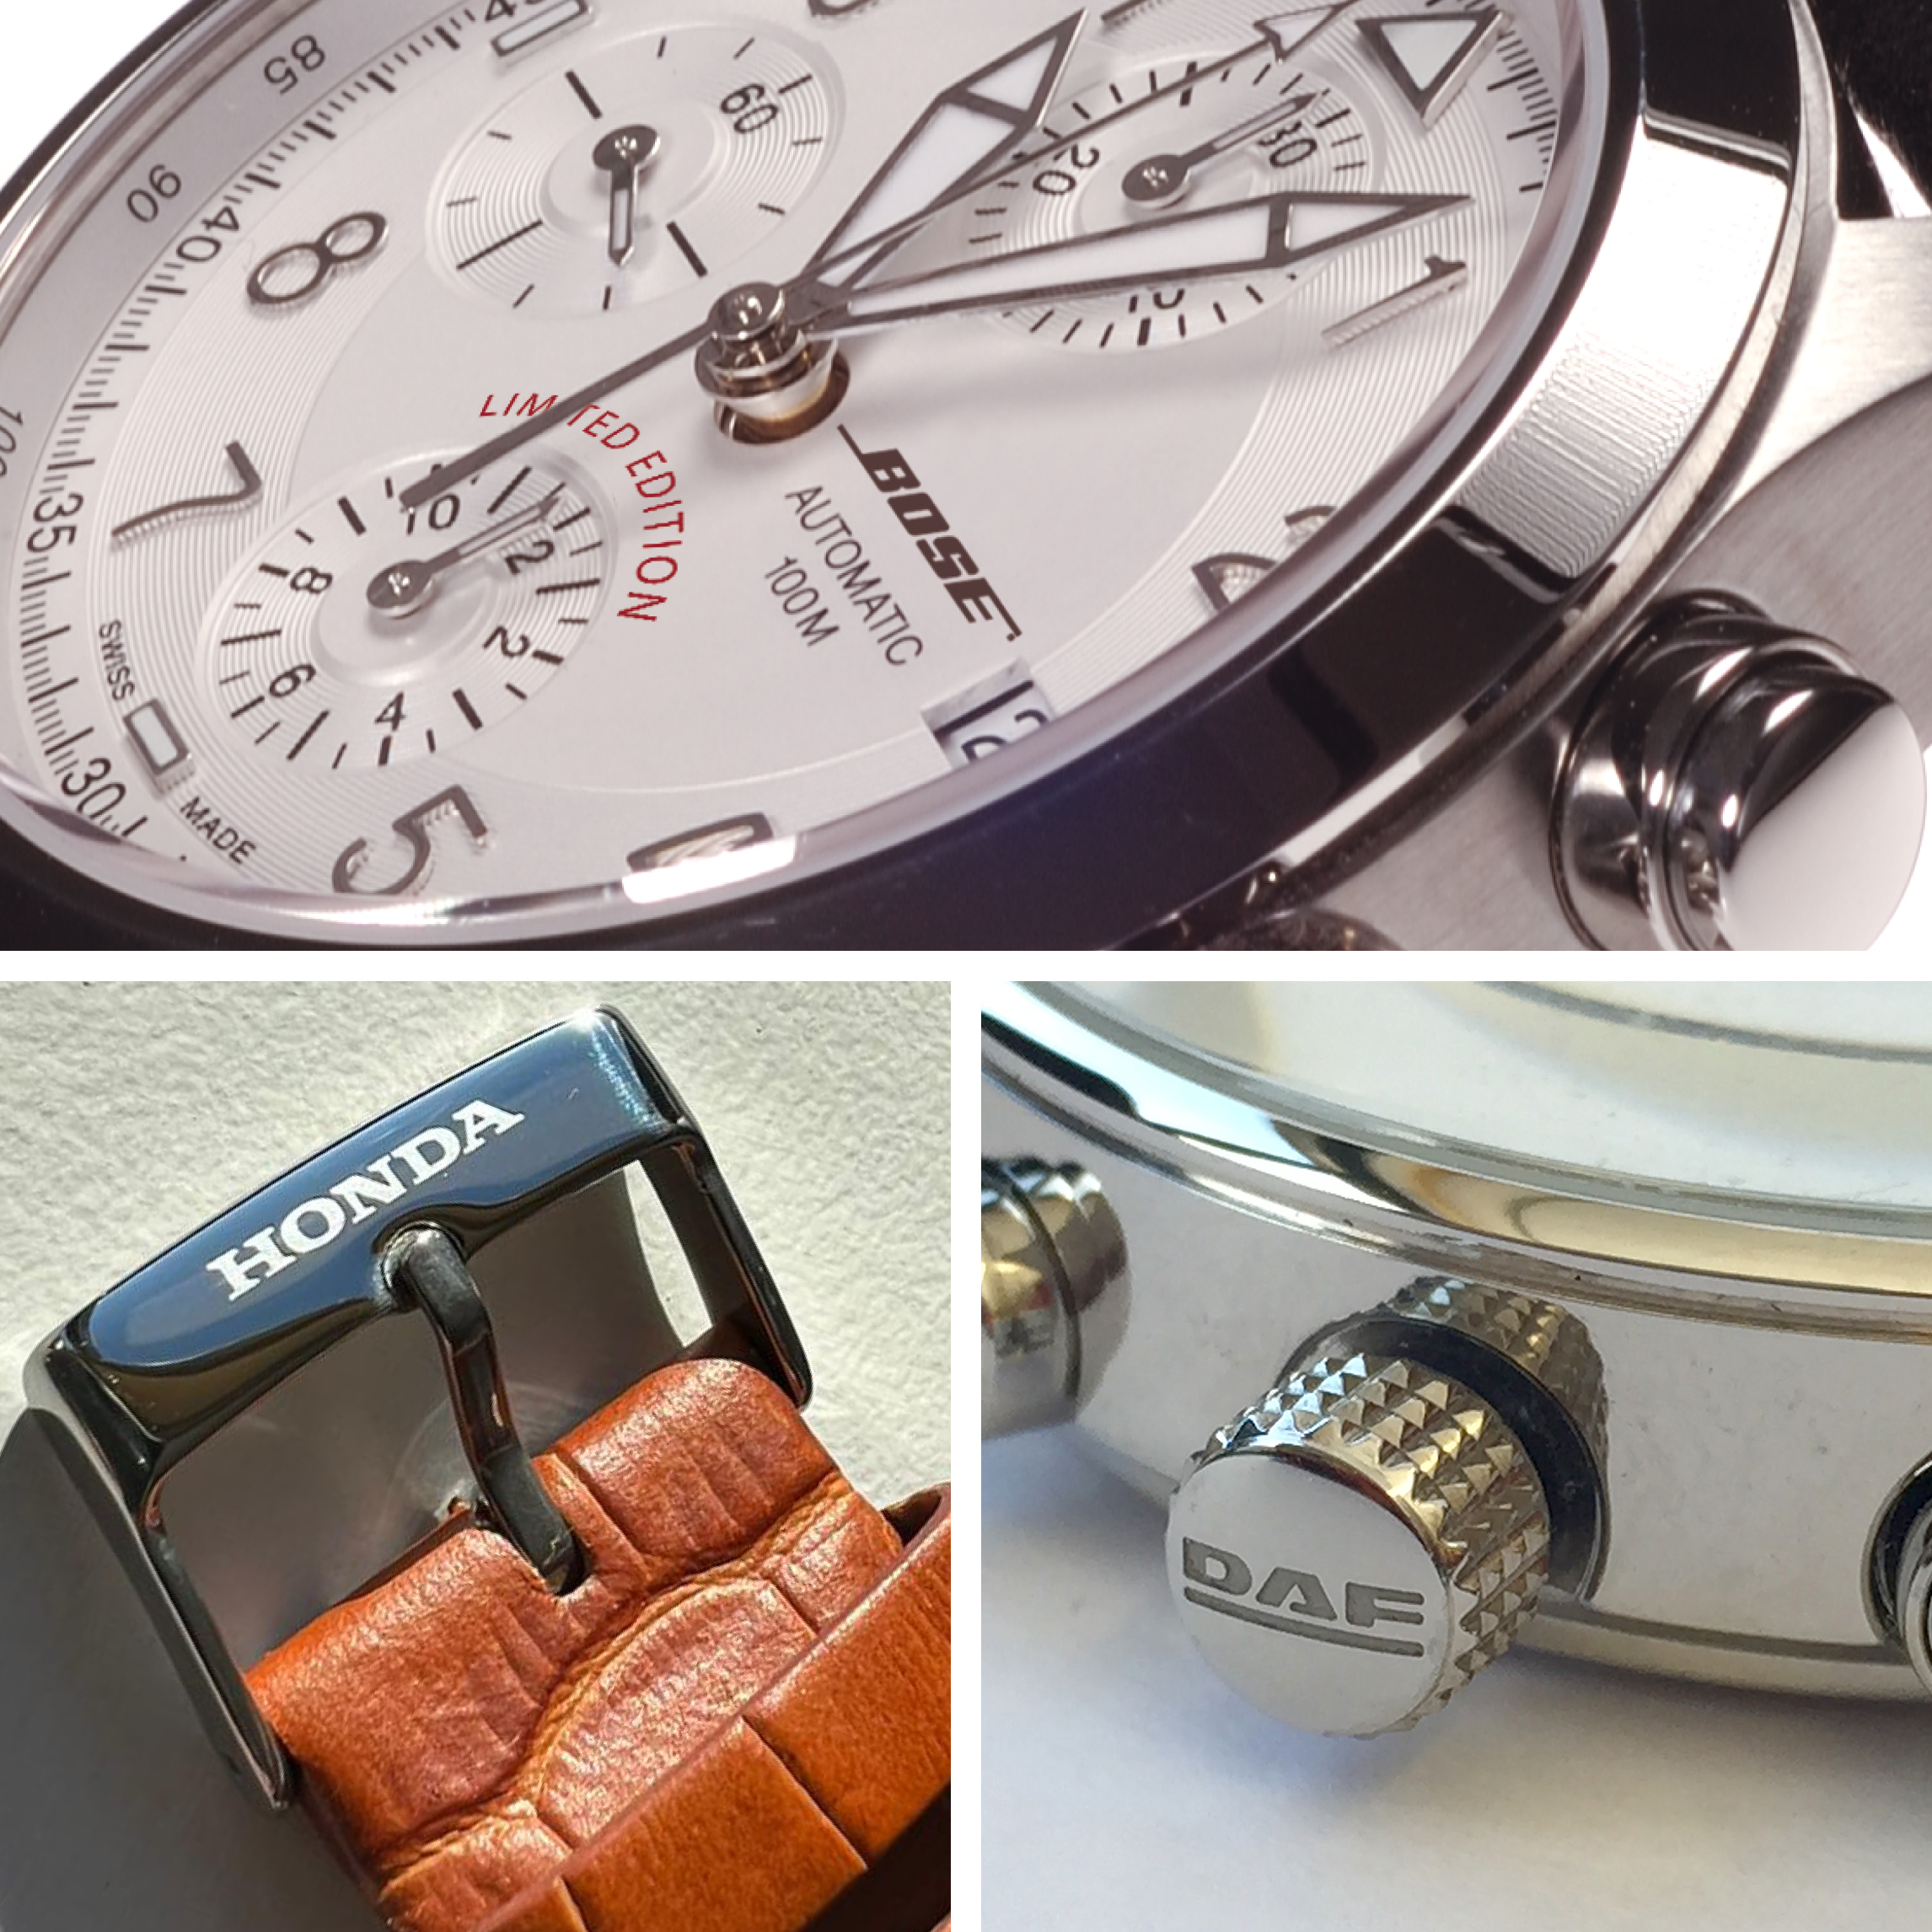 Watch Branding - Your Style, Your Way: Personalize your custom watches with options like logo on dial, case back engraving, and more. Collaborate with our designers for a unique design proposal, ensuring satisfaction while adhering to your brand guidelines or creating new ones